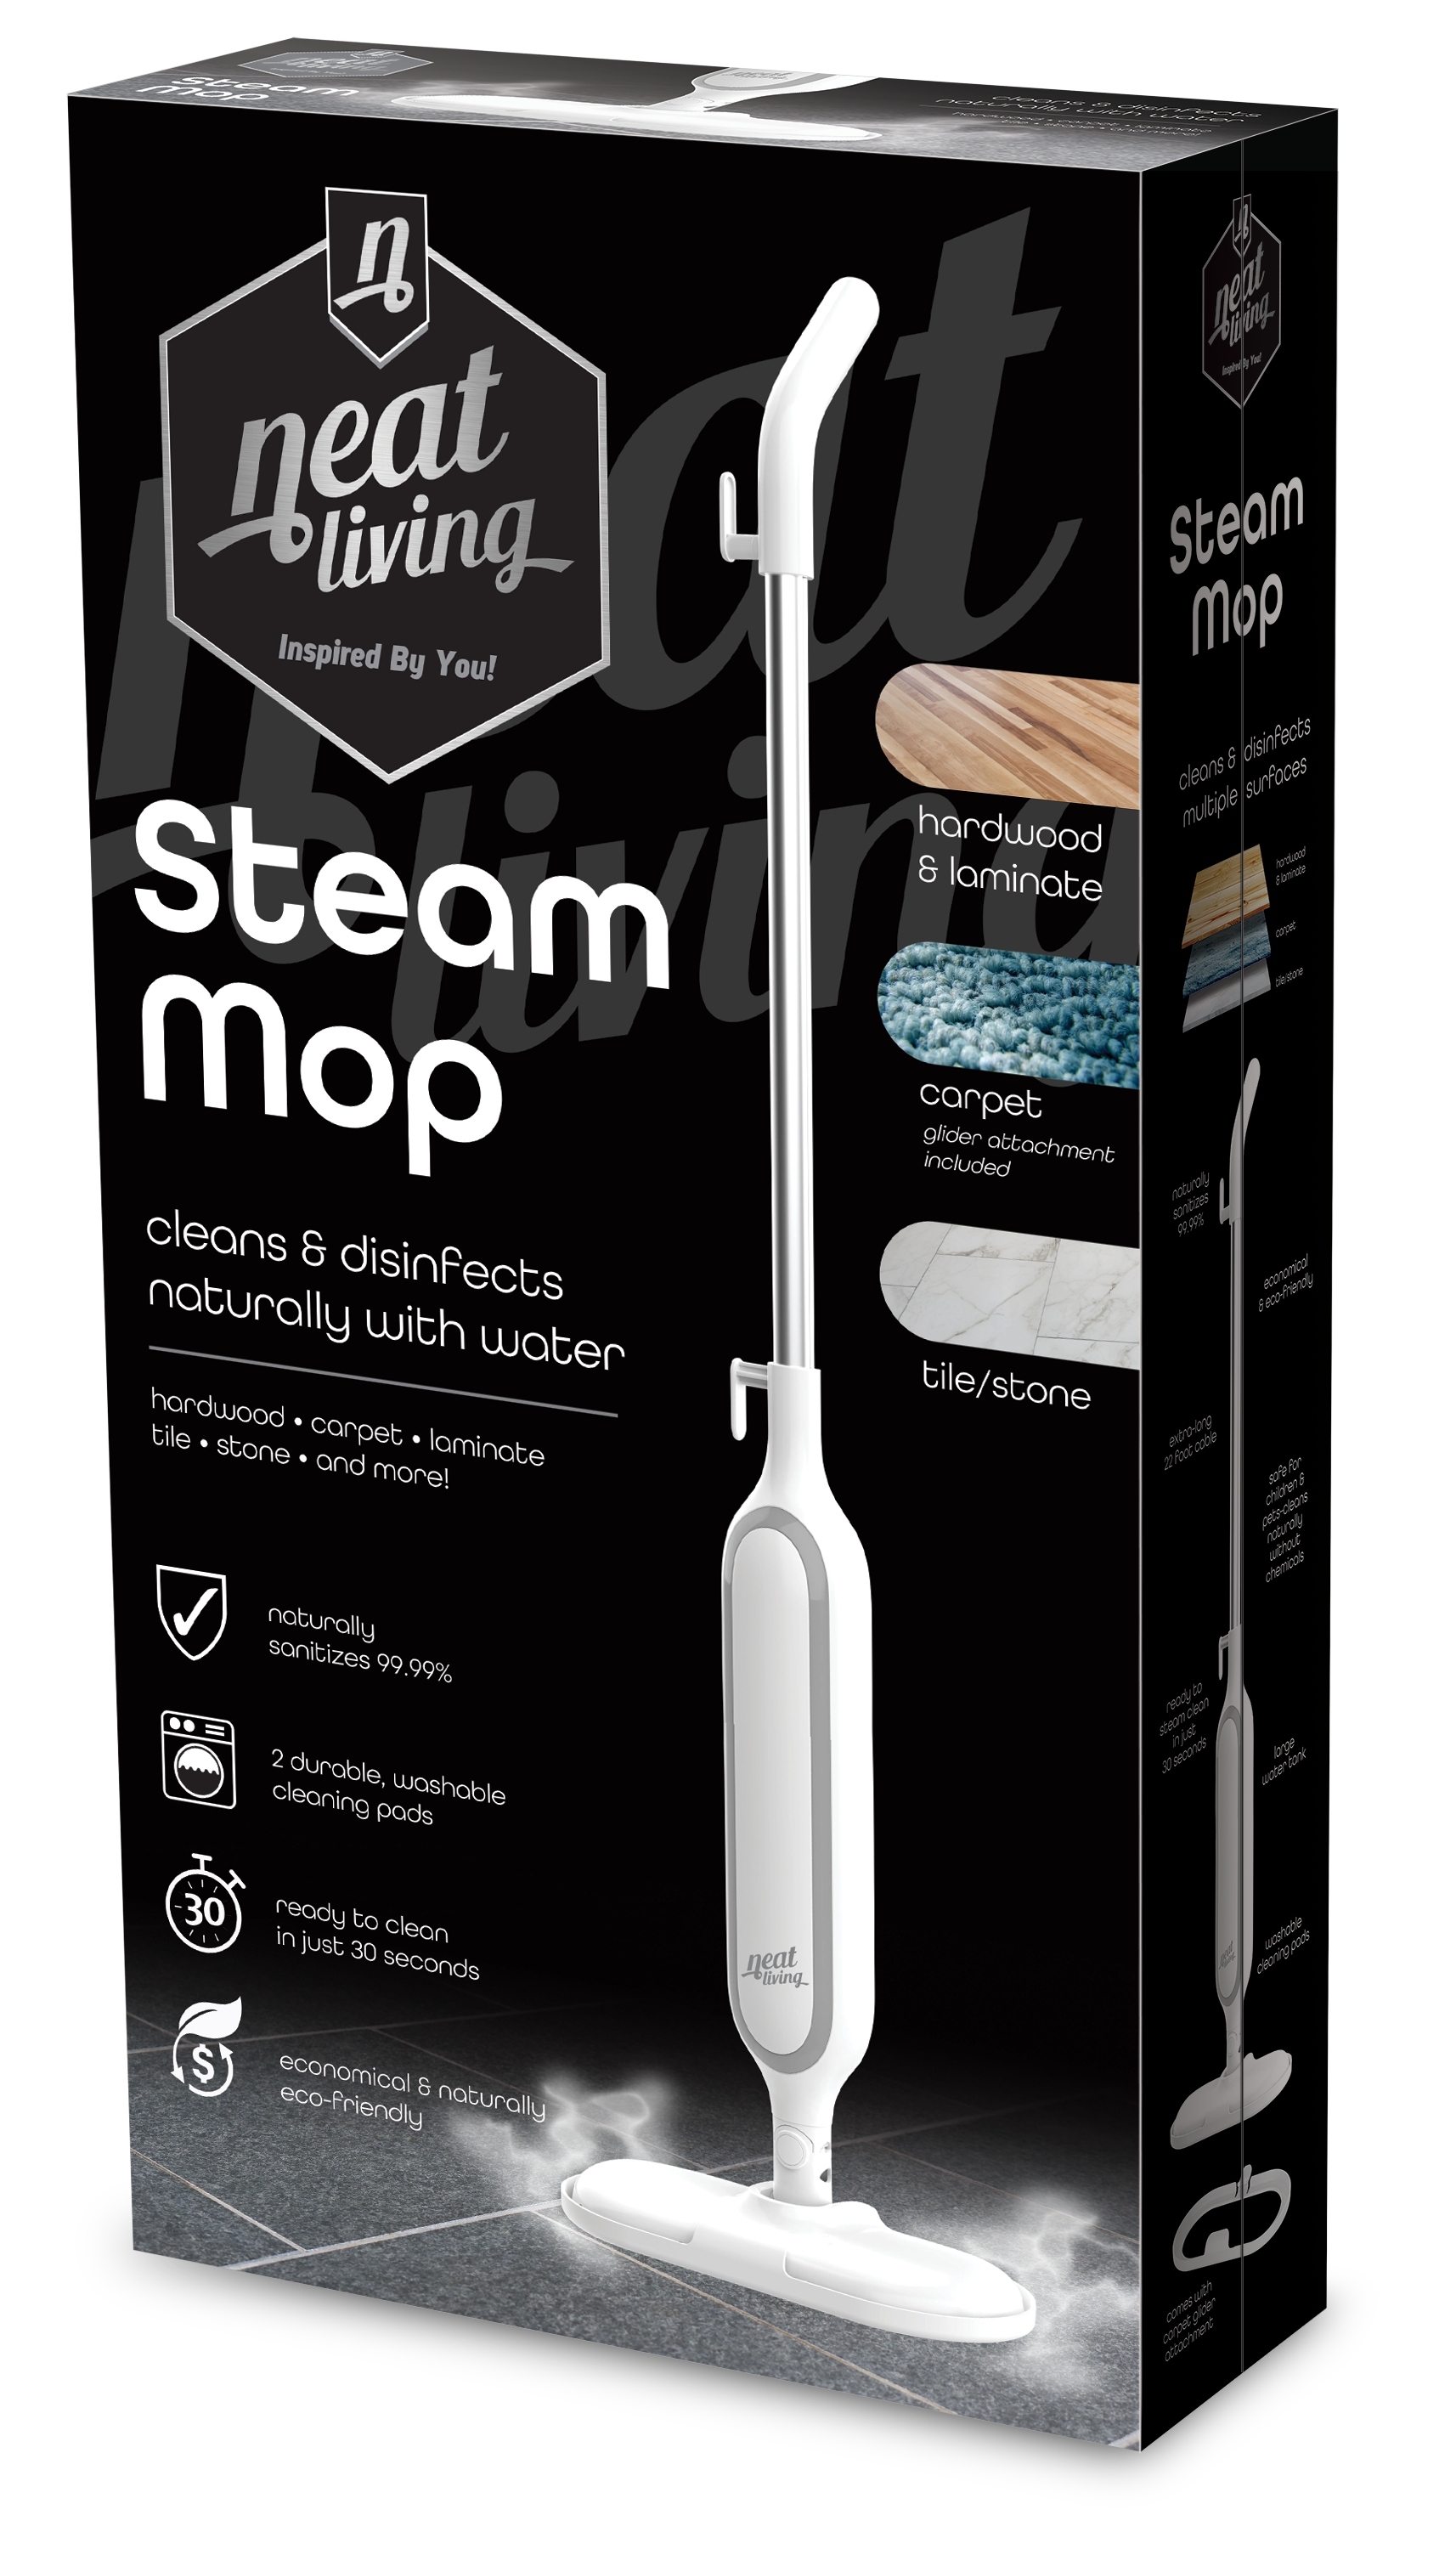 Steam Mop with 2 Dirt Grip Pads, Large Water Tank, Lightweight, Safe for all Sealed Hard Floors like Tile, Hardwood, Stone, Laminate, Vinyl & More, White/Gray